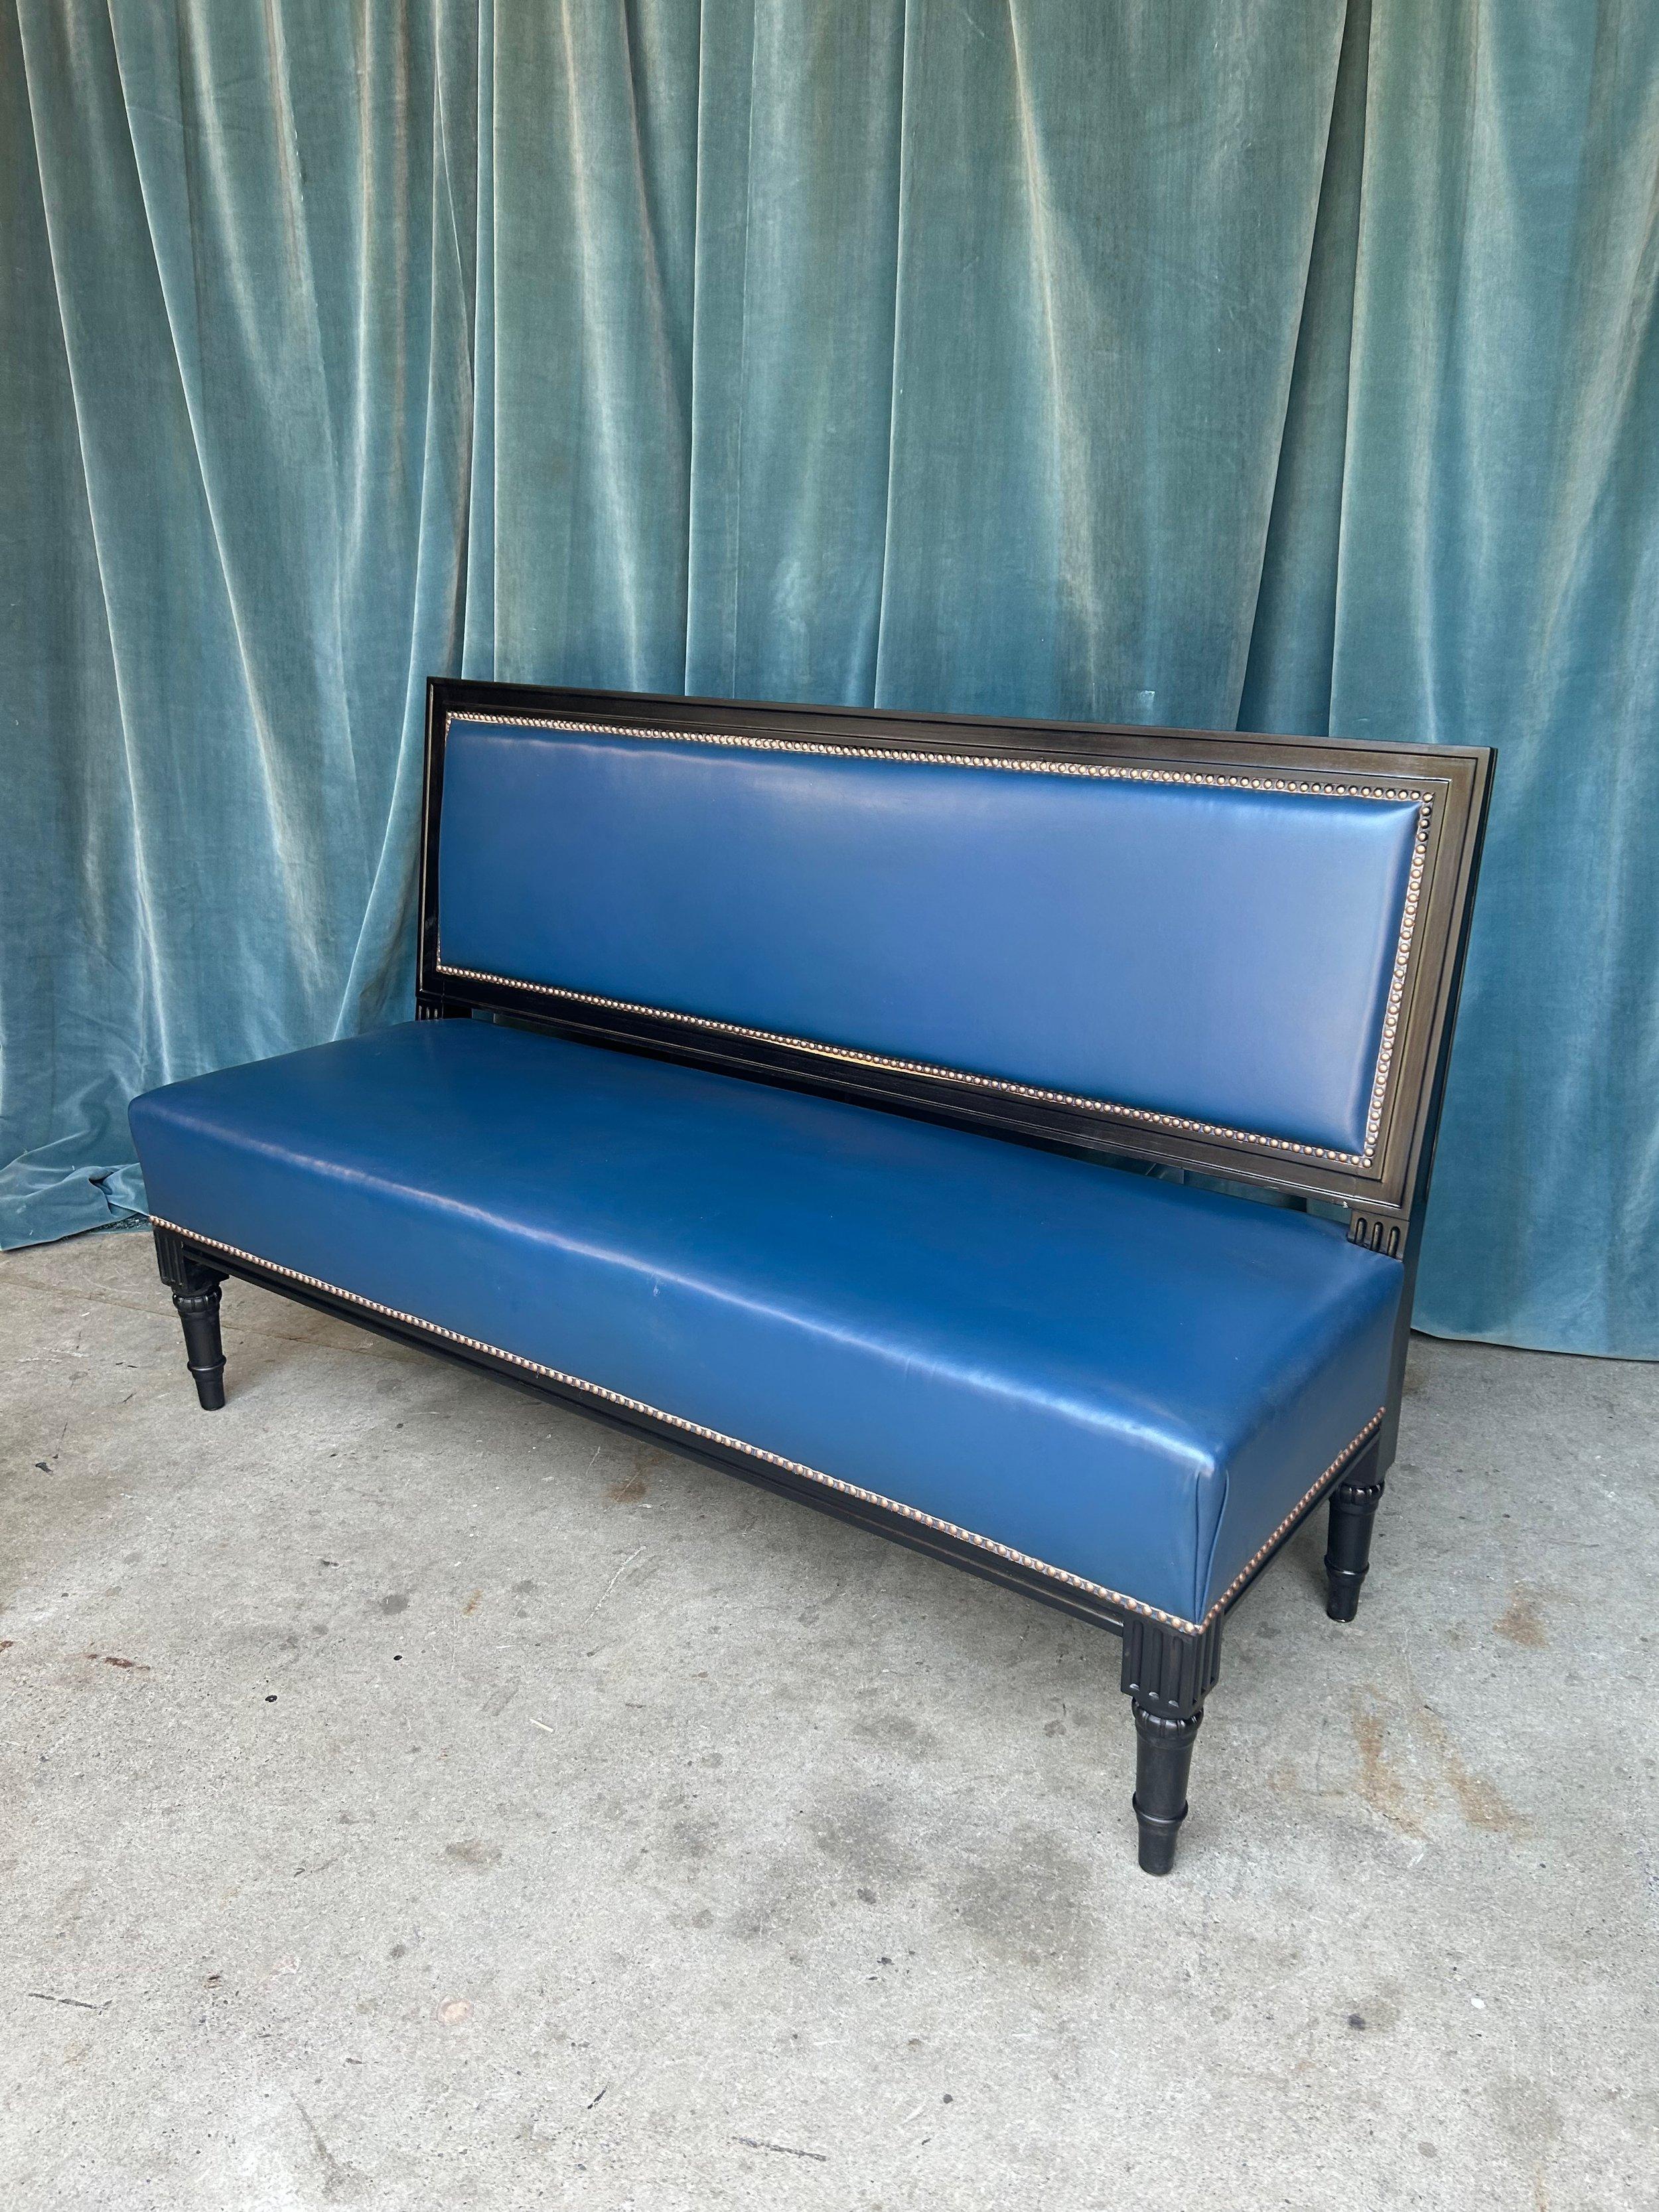 A classic French early 20th century ebonized banquette upholstered in blue leather. Discover the allure of French elegance with this handsome early 20th century ebonized banquette, upholstered in sumptuous deep blue leather. This exquisite piece